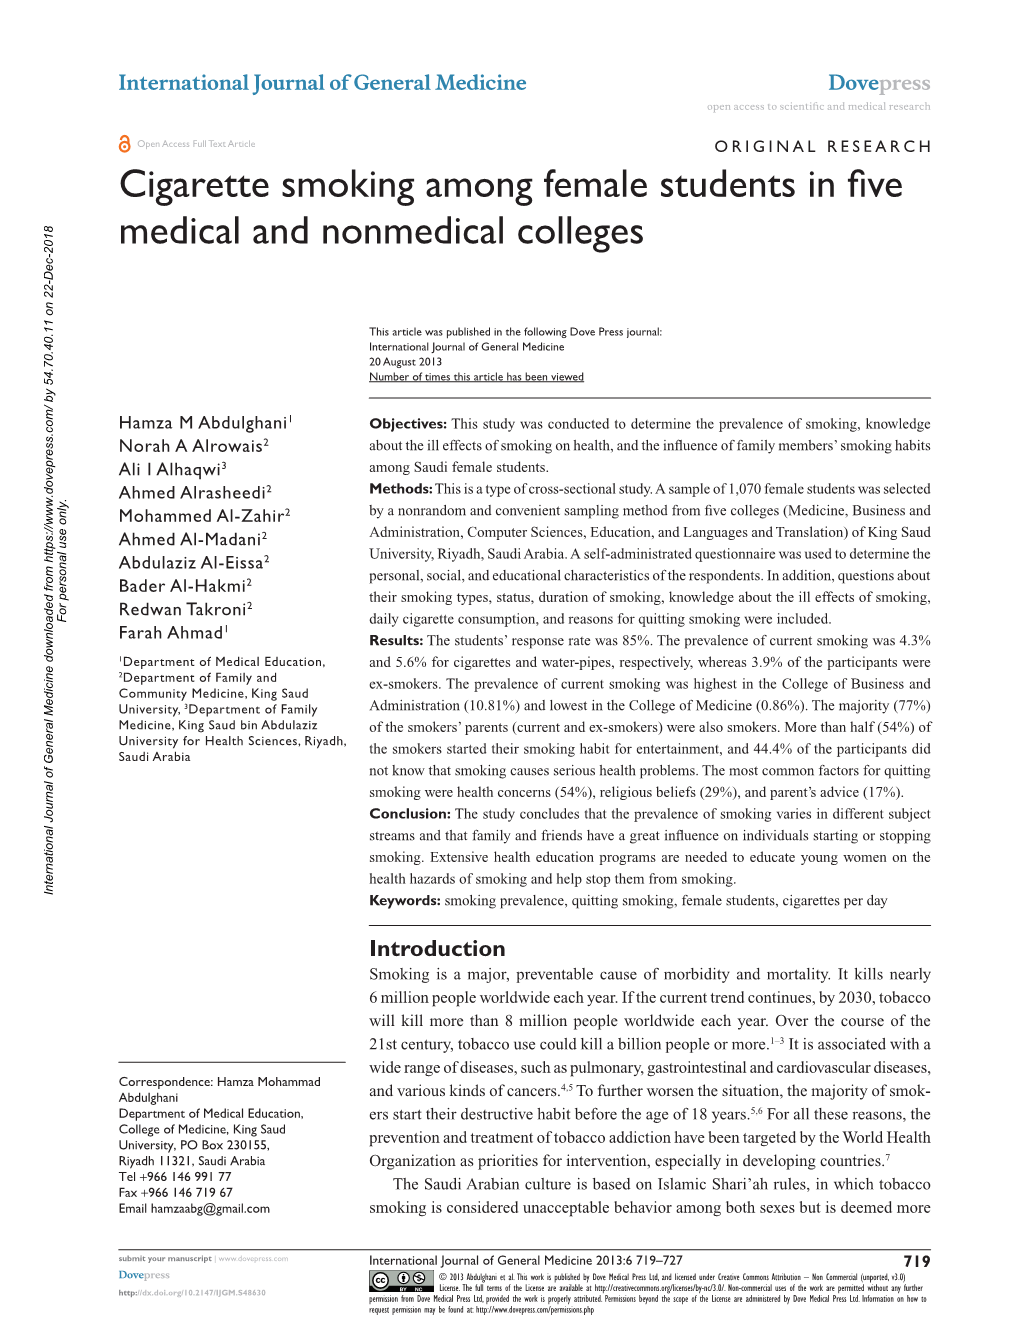 Cigarette Smoking Among Female Students in Five Medical and Nonmedical Colleges